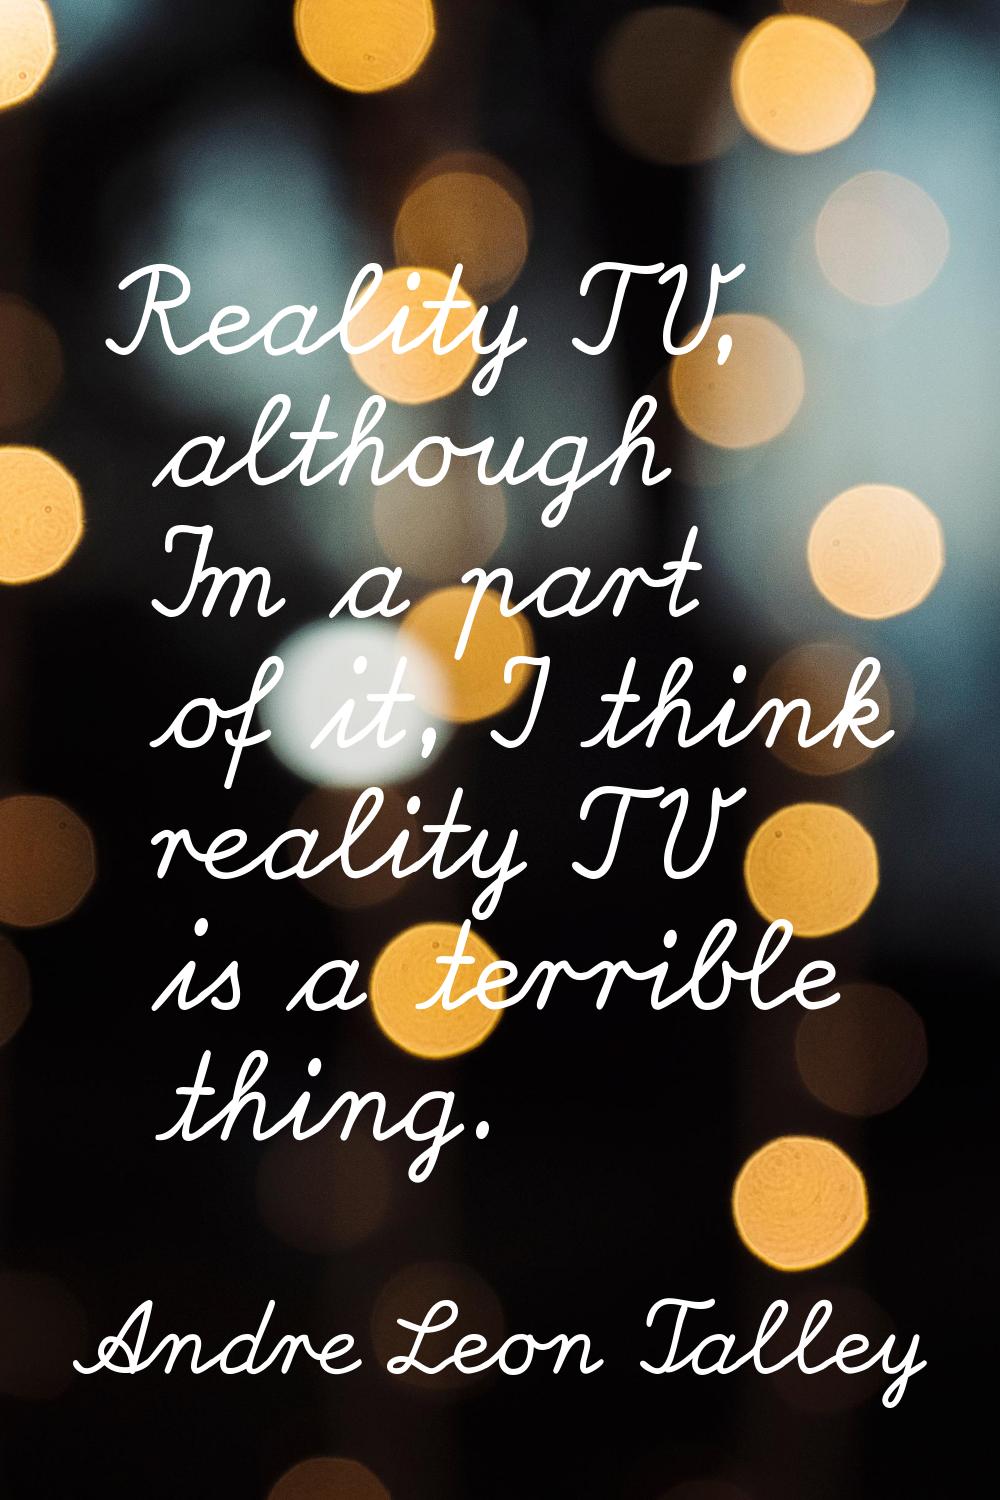 Reality TV, although I'm a part of it, I think reality TV is a terrible thing.